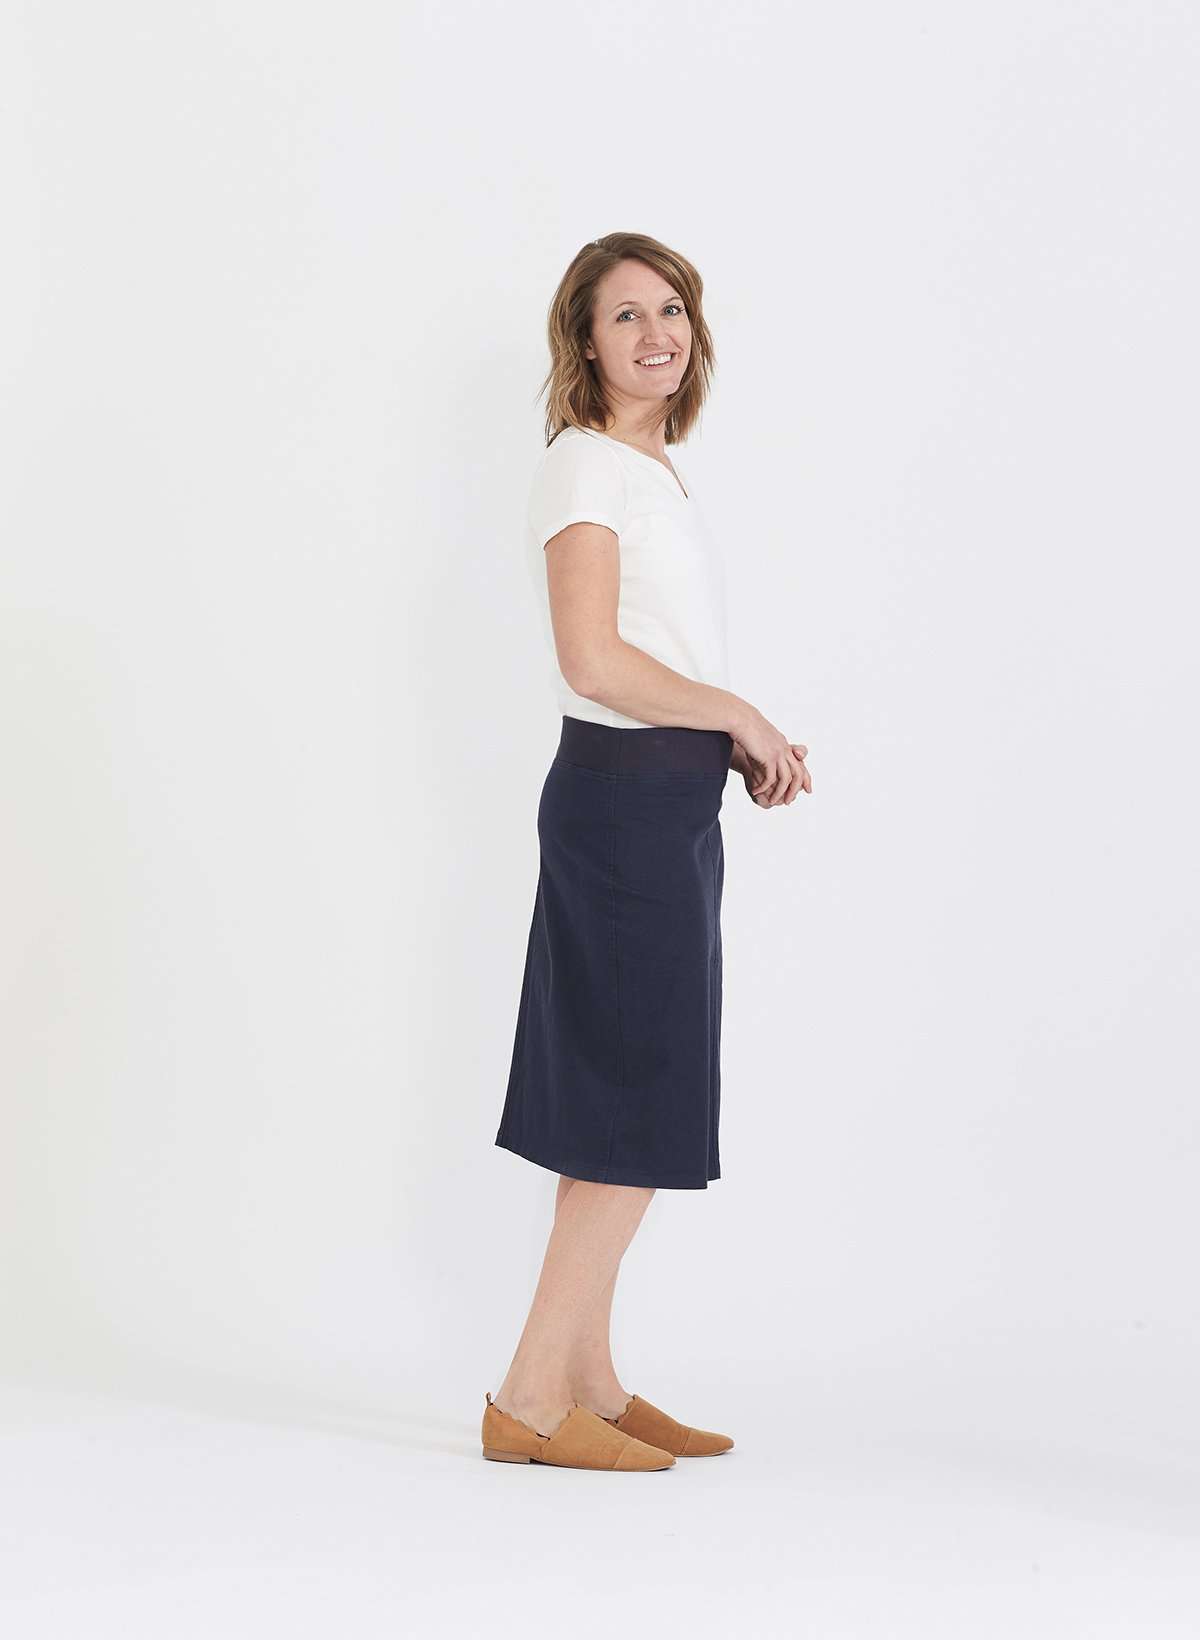 Woman wearing a colored, denim-like skirt with a elastic waistband. This is a modest skirt that falls below the knee. It comes in Burgundy, olive, khaki, black and navy. It is also paired with a white v-neck t-shirt.